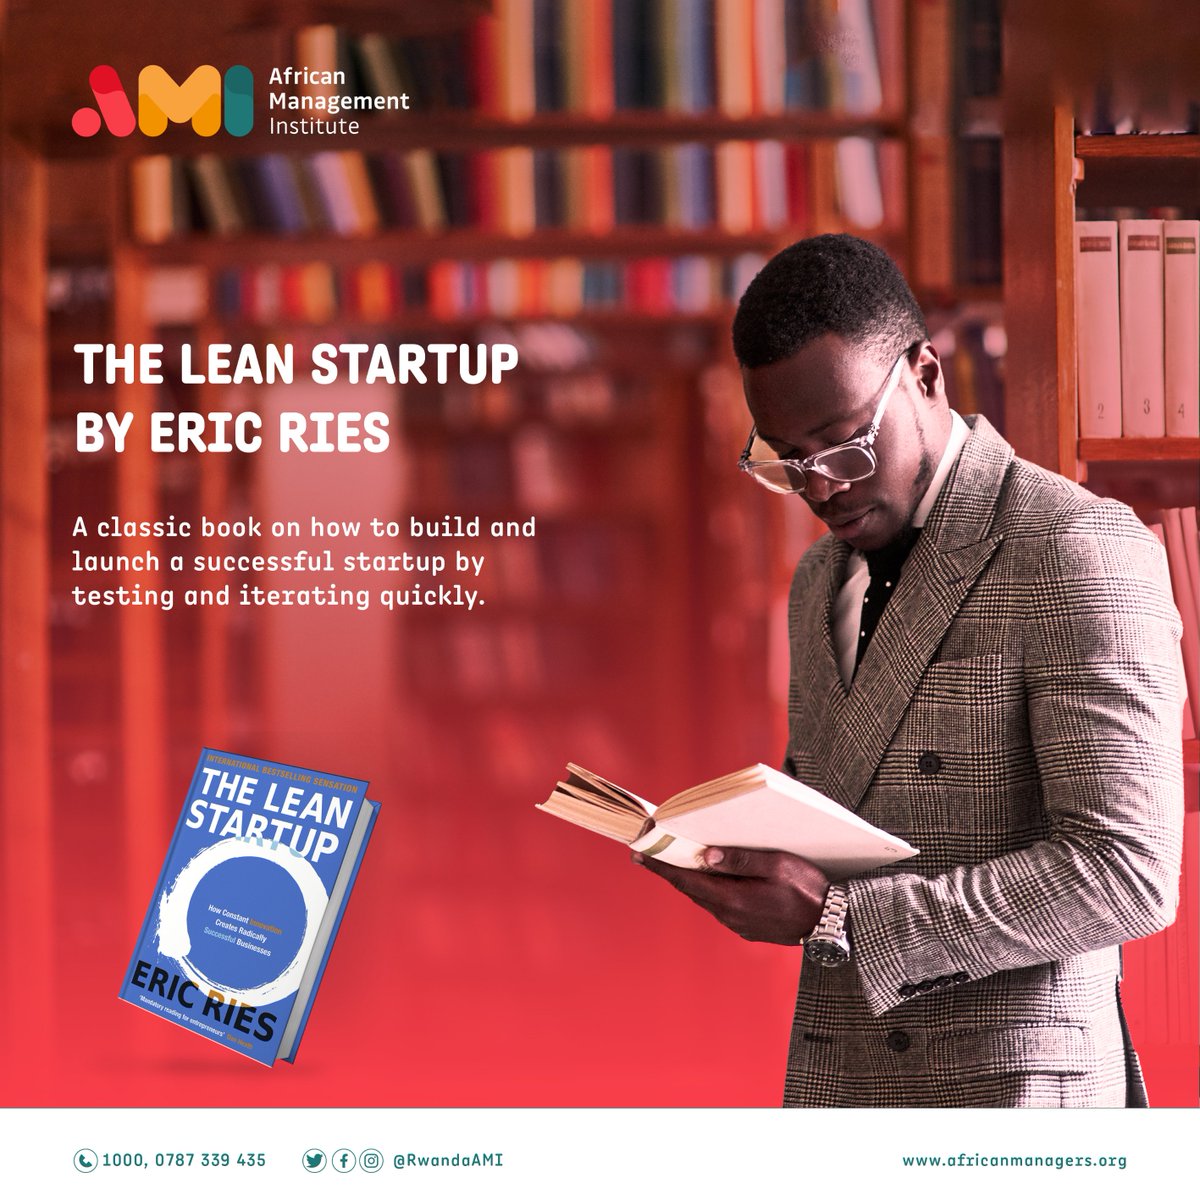 Dive into 'The Lean Startup' by Eric Ries for your startup success playbook! Learn rapid experimentation and iteration techniques to conquer #entrepreneurship challenges. Get ready to turn your startup dreams into reality! #WeekendReads #AMIRwanda